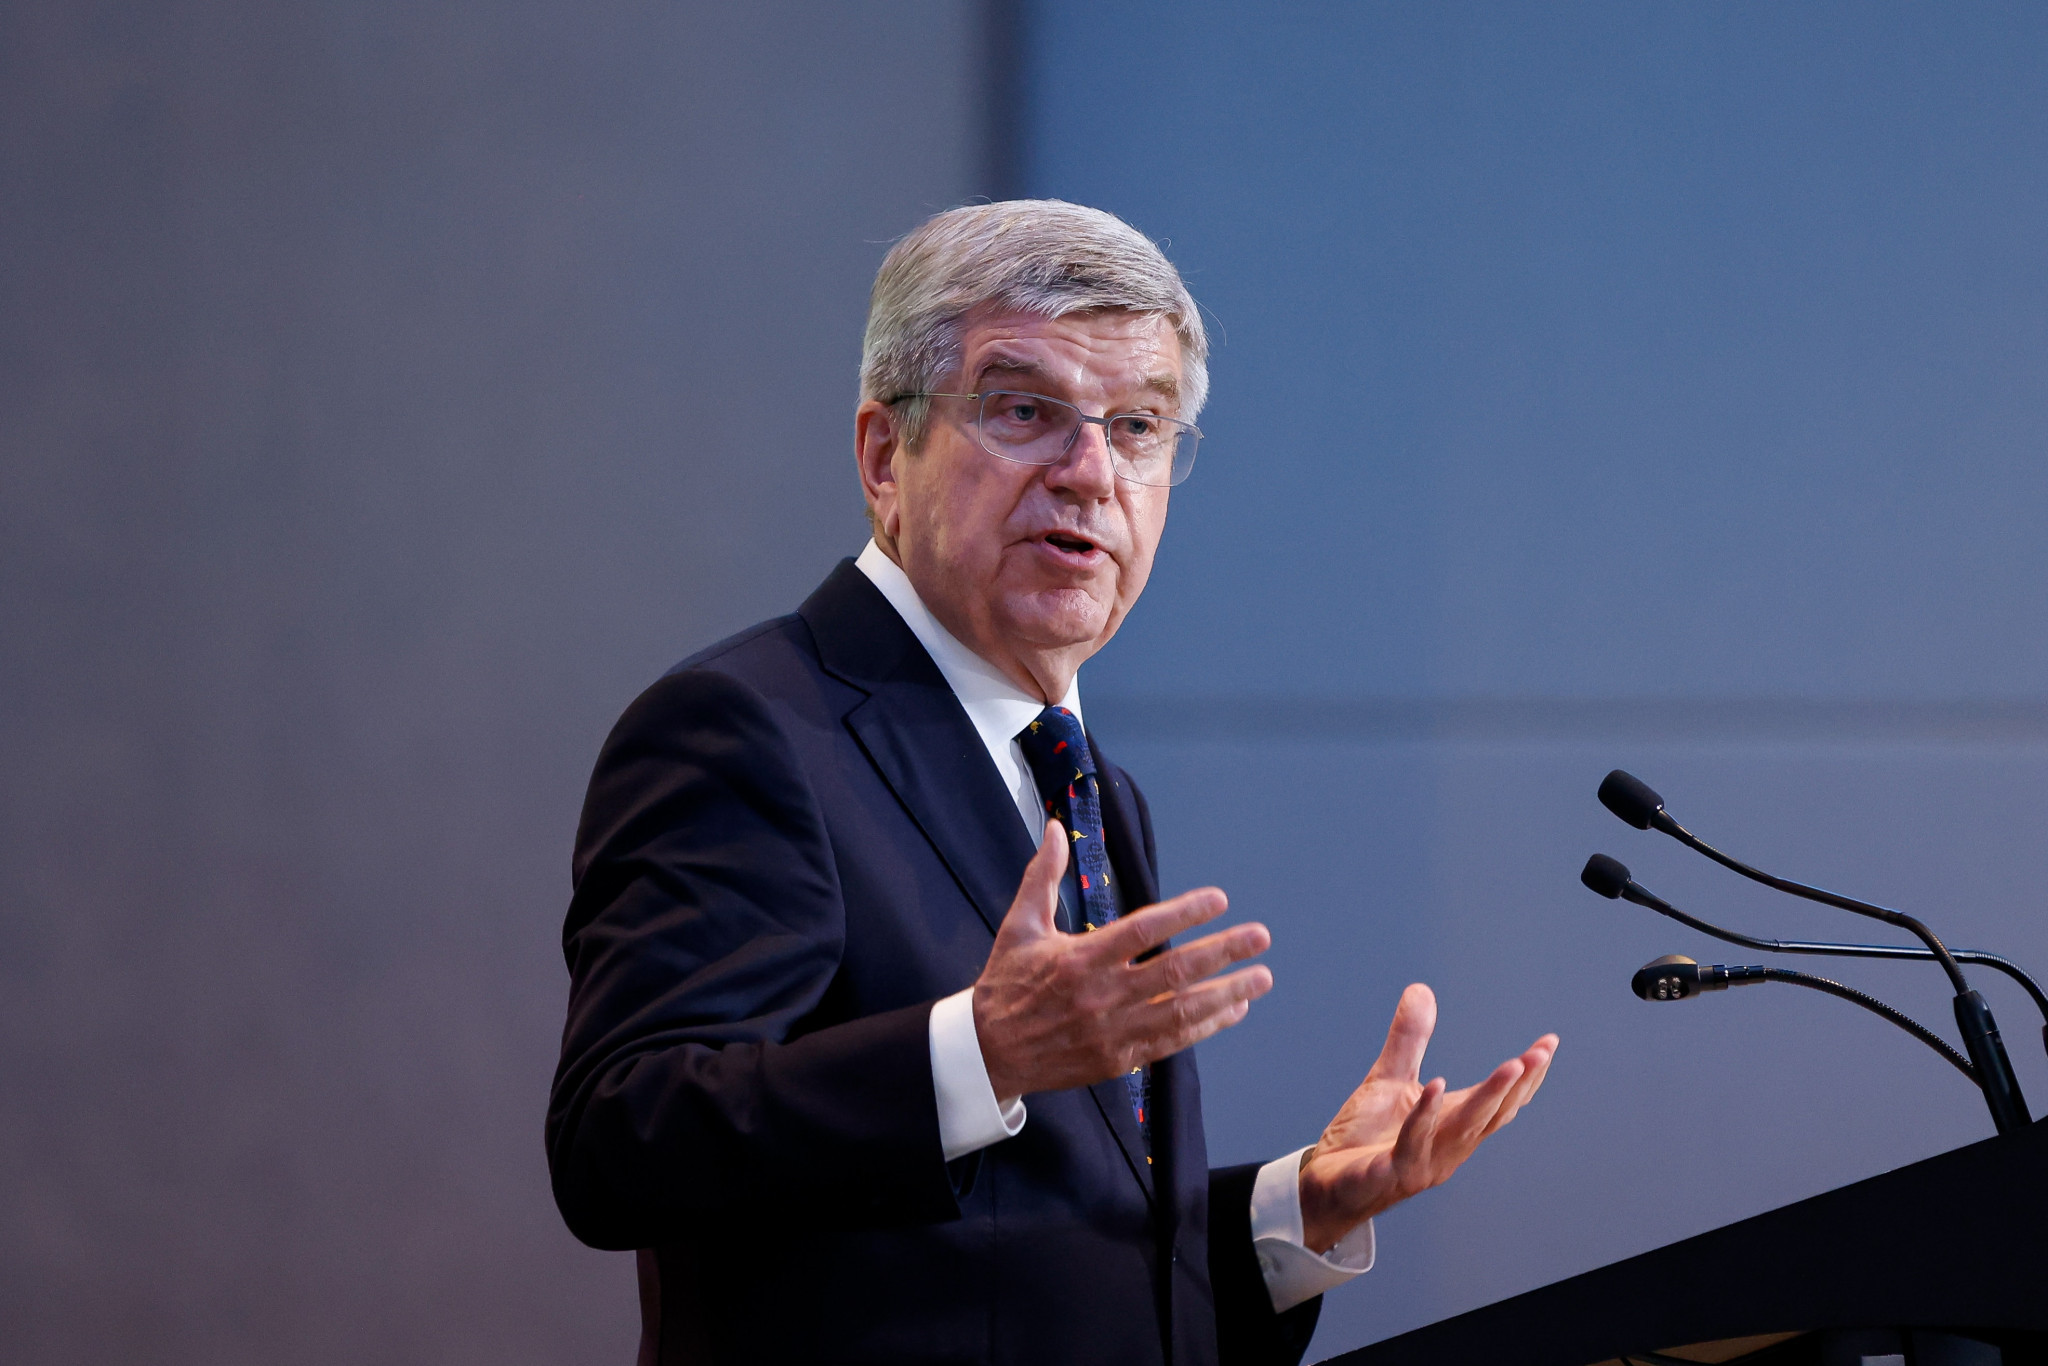 IOC President Thomas Bach defended the organisation's response to the war in Ukraine in his opening speech at the Session in Lausanne  ©Getty Images